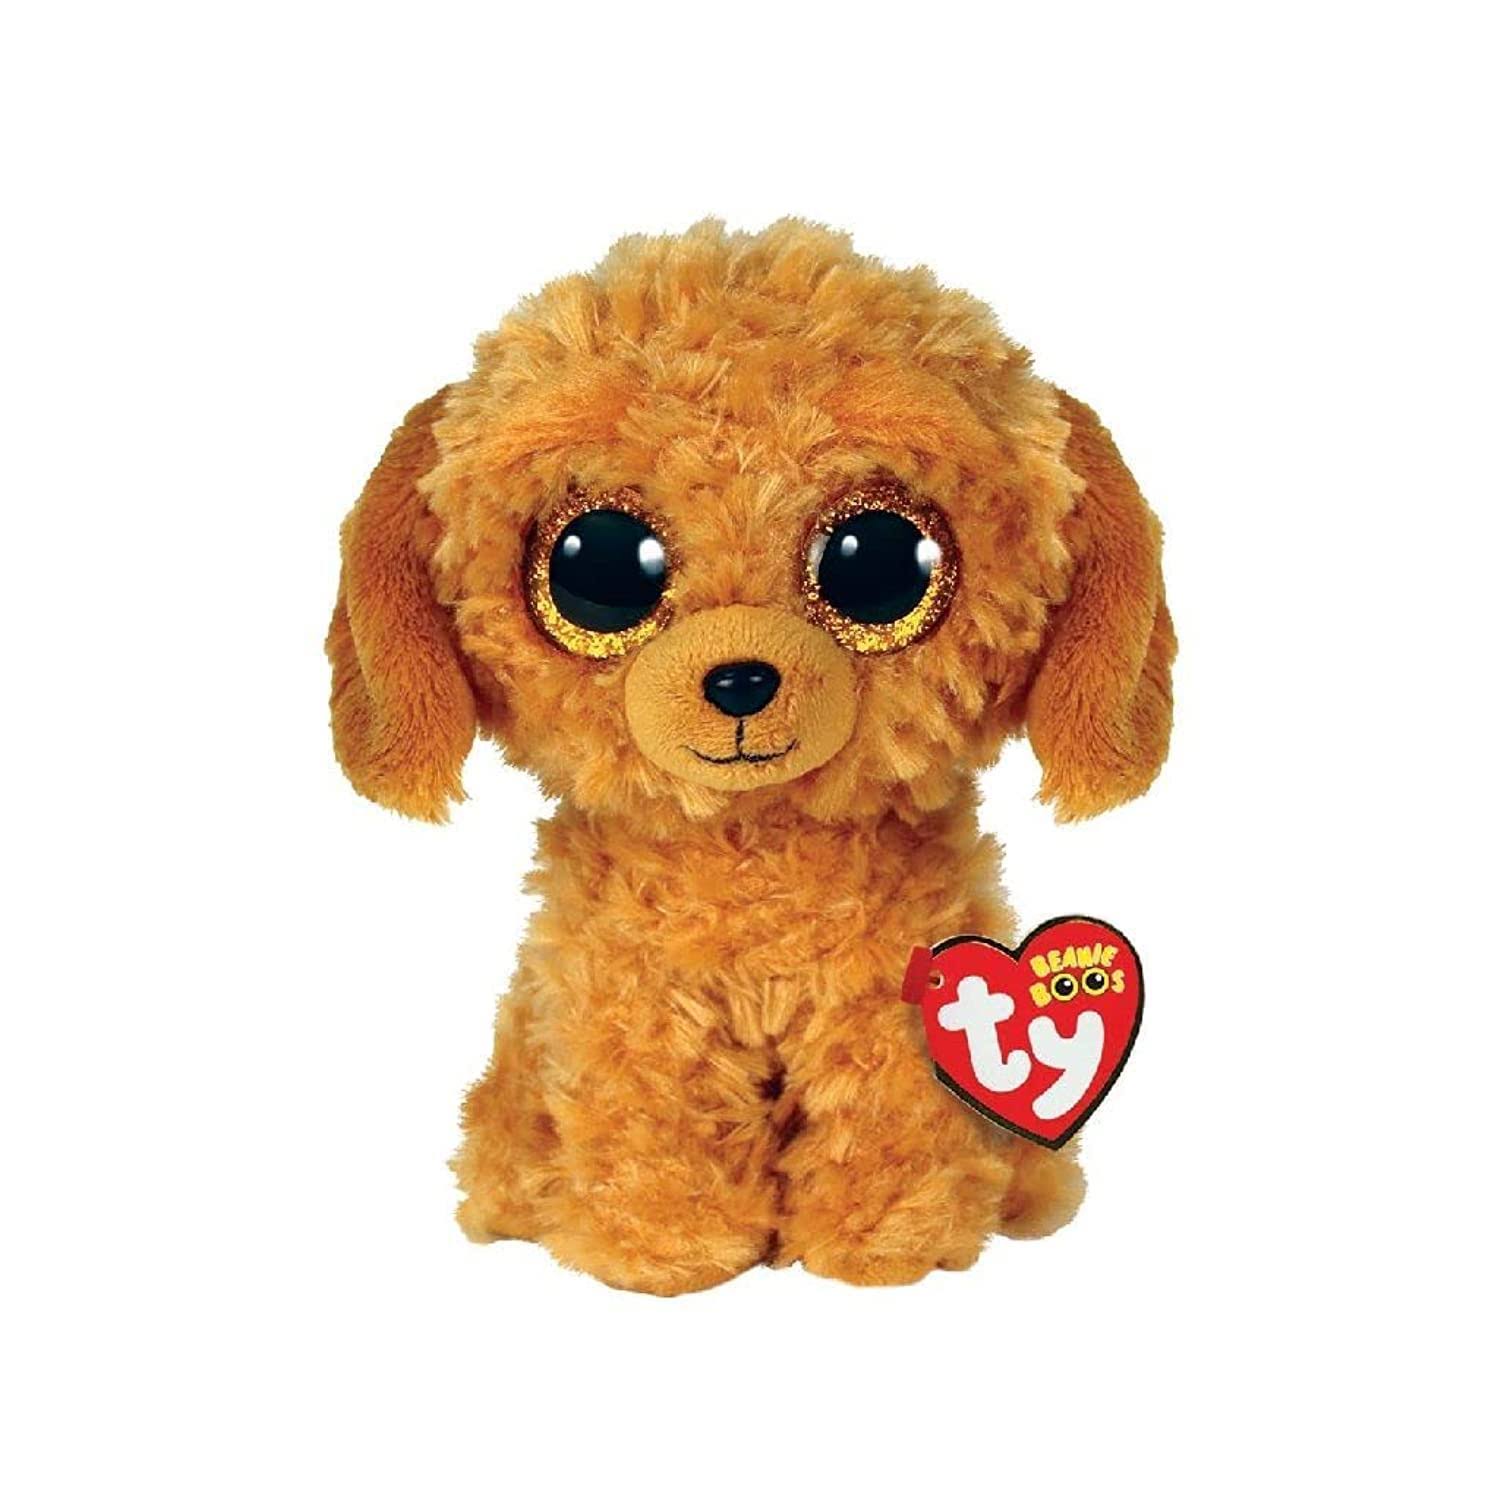 TY Noodles Dog - Beanie Boo